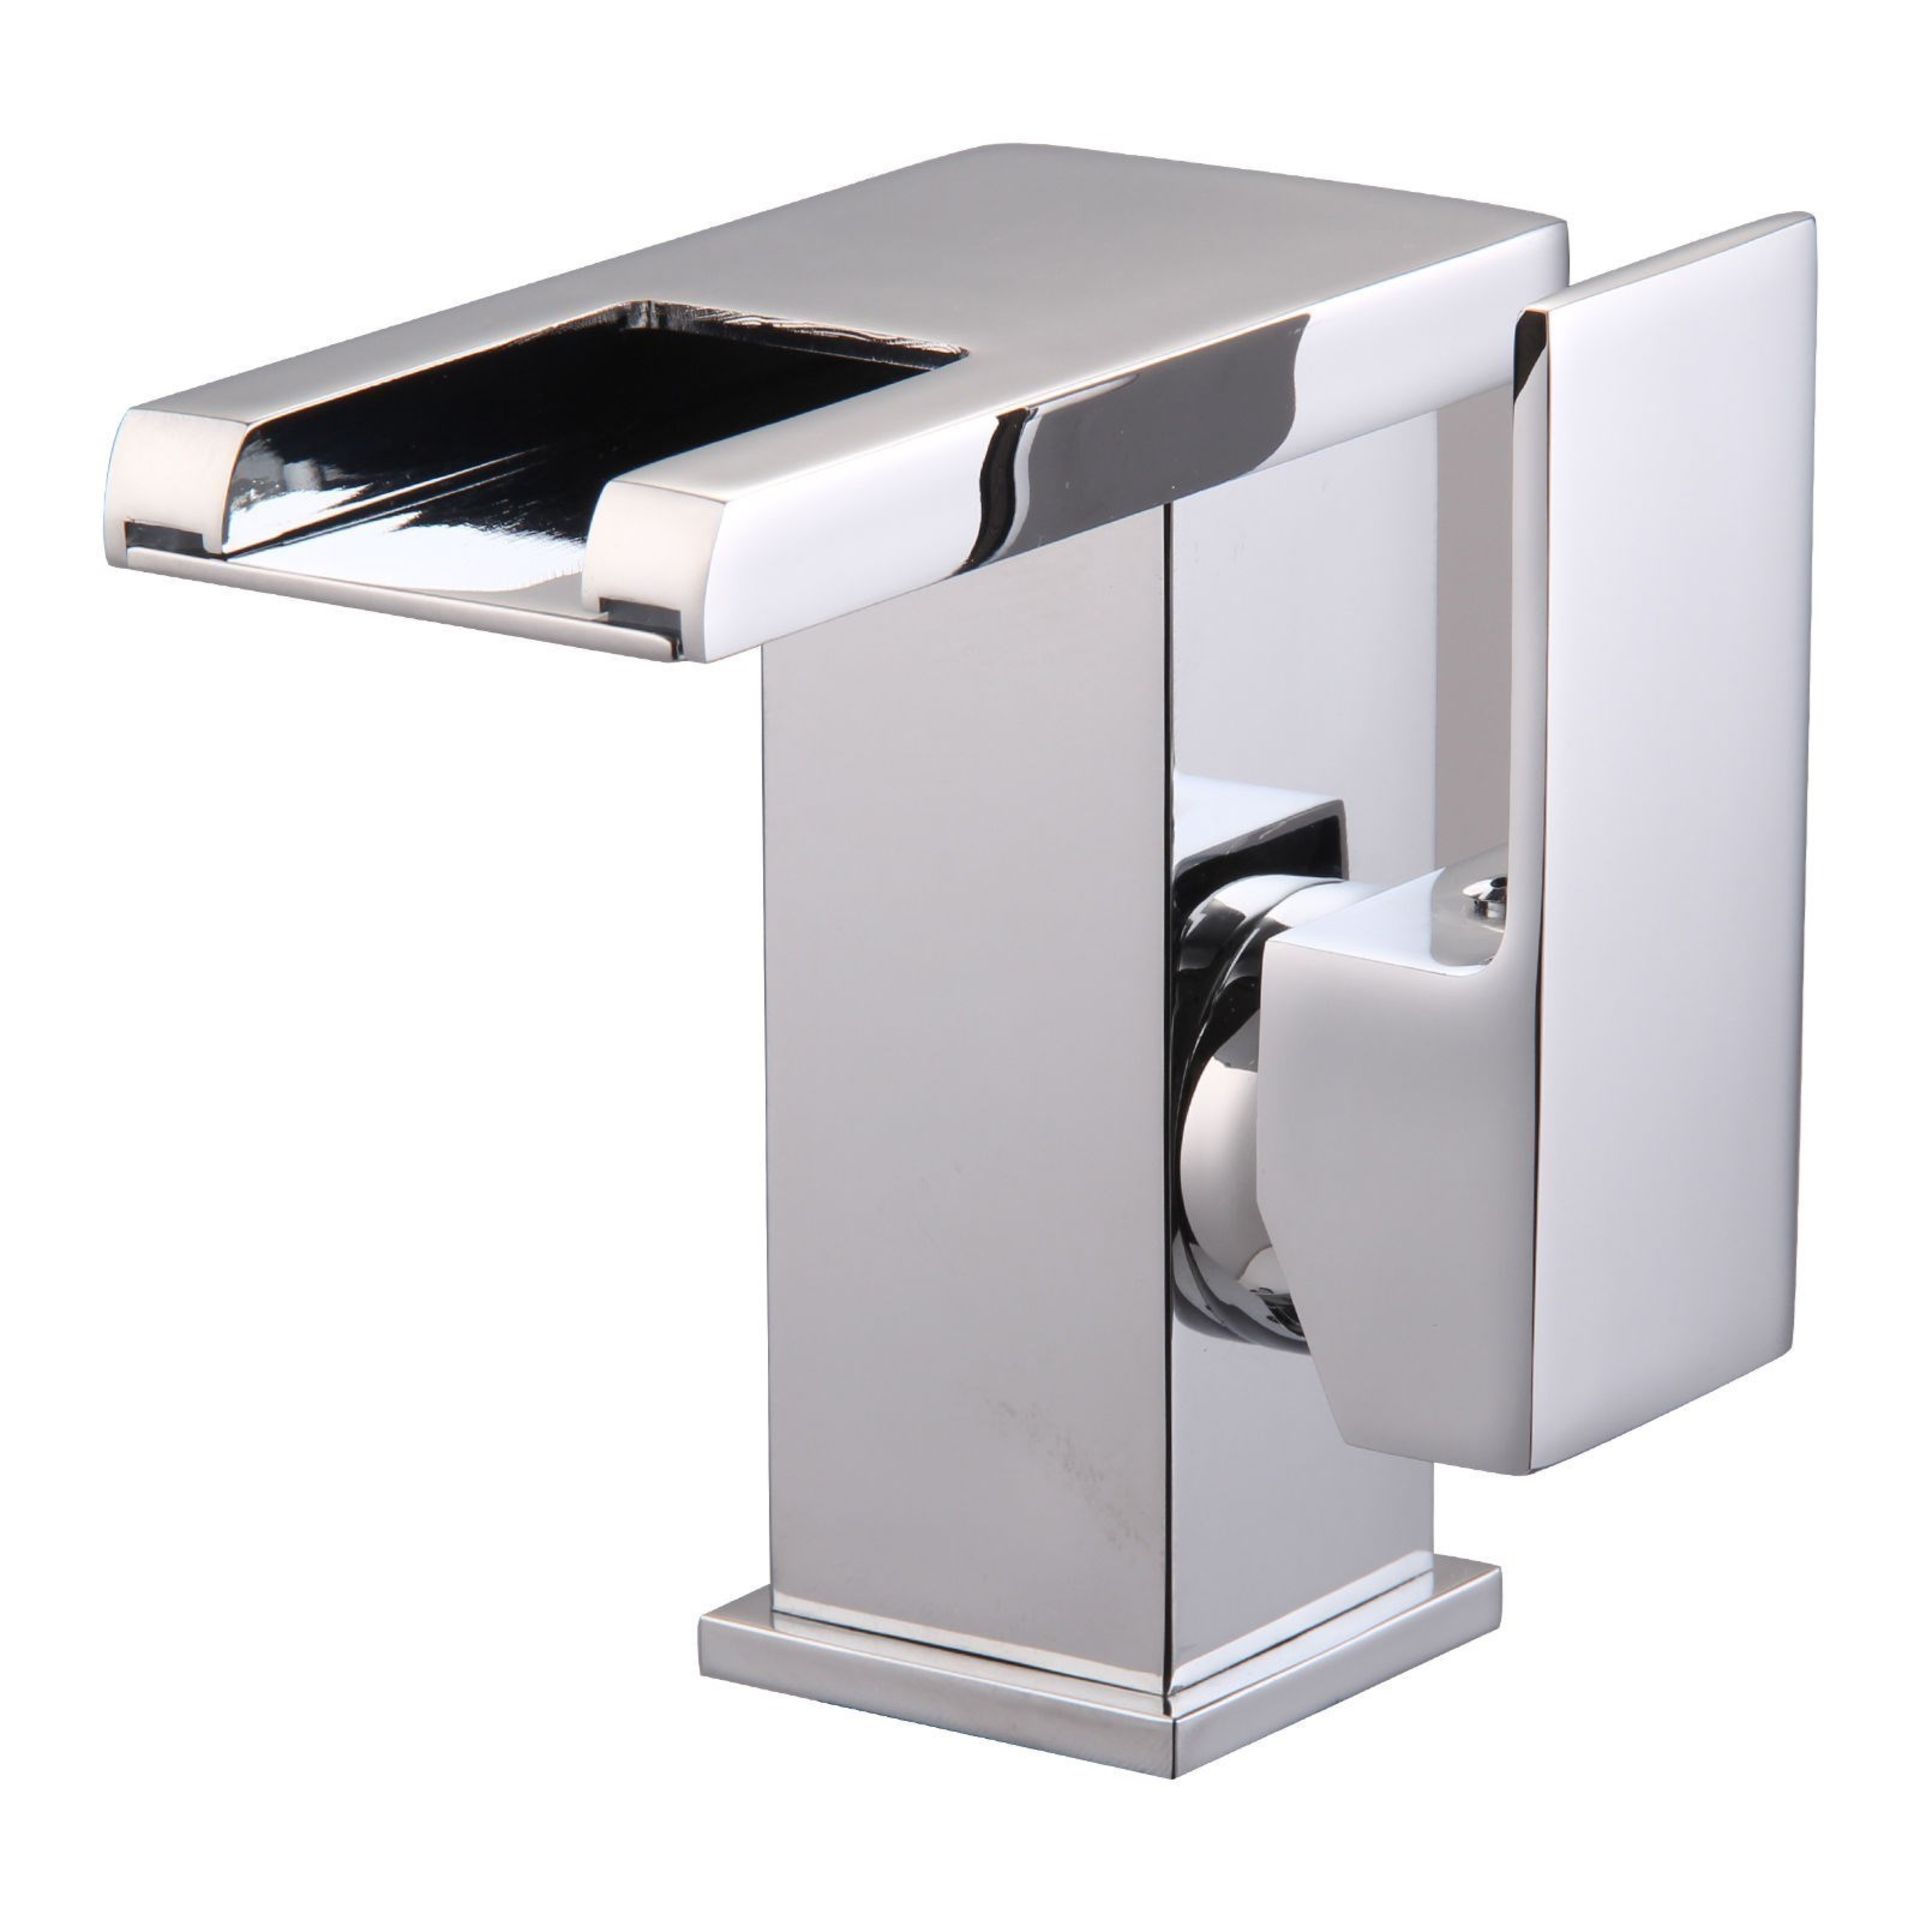 (YU1030) LED Waterfall Bathroom Basin Mixer Tap. RRP £229.99.Easy to install and clean. All ... - Image 2 of 3